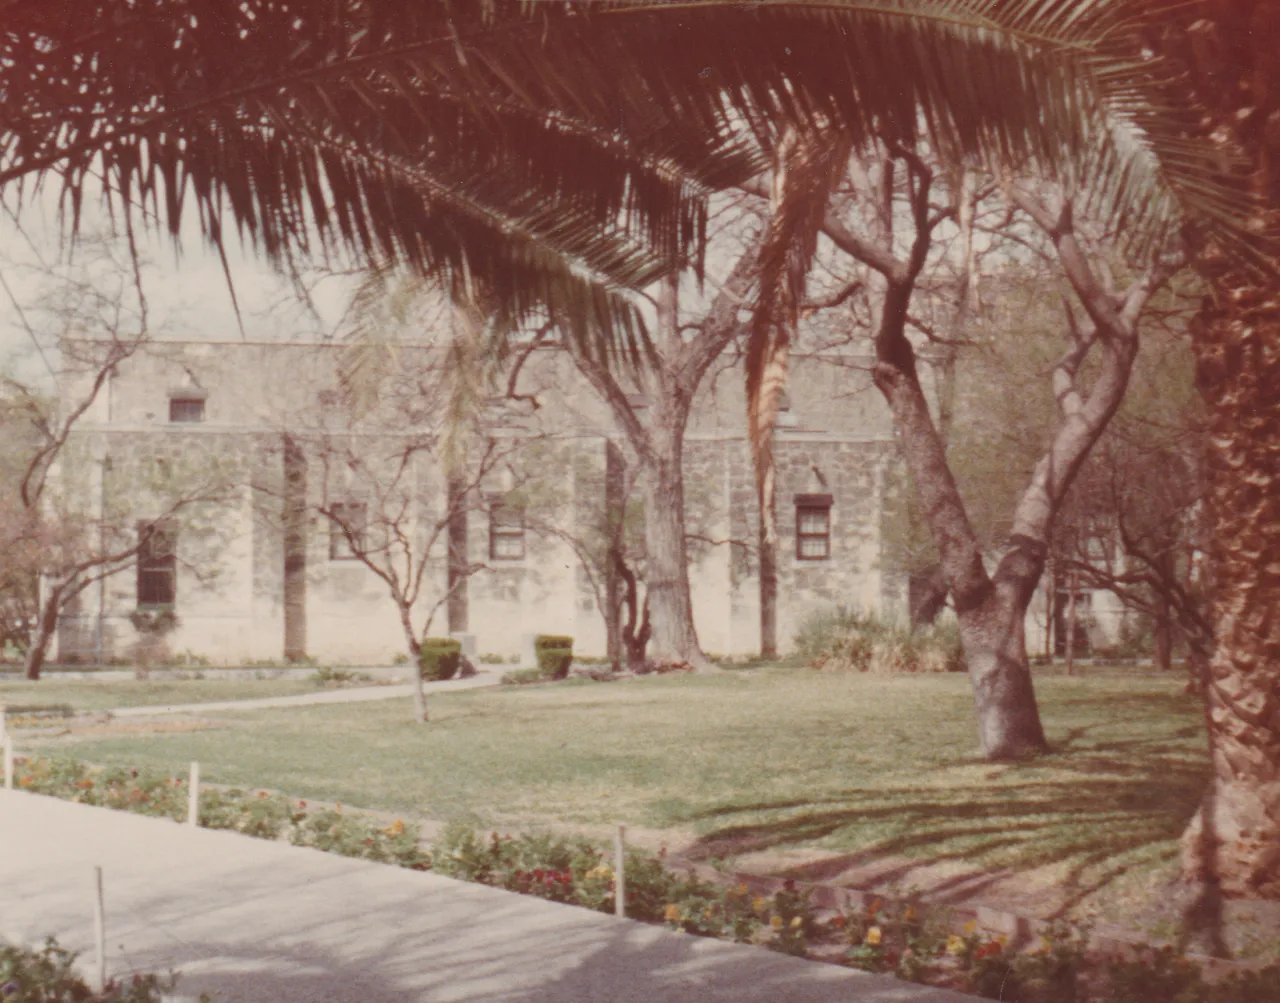 1975-03-26 - Wednesday - San Antonio, no dates on these pic-02 - Lawn, building, trees, 11pics.png